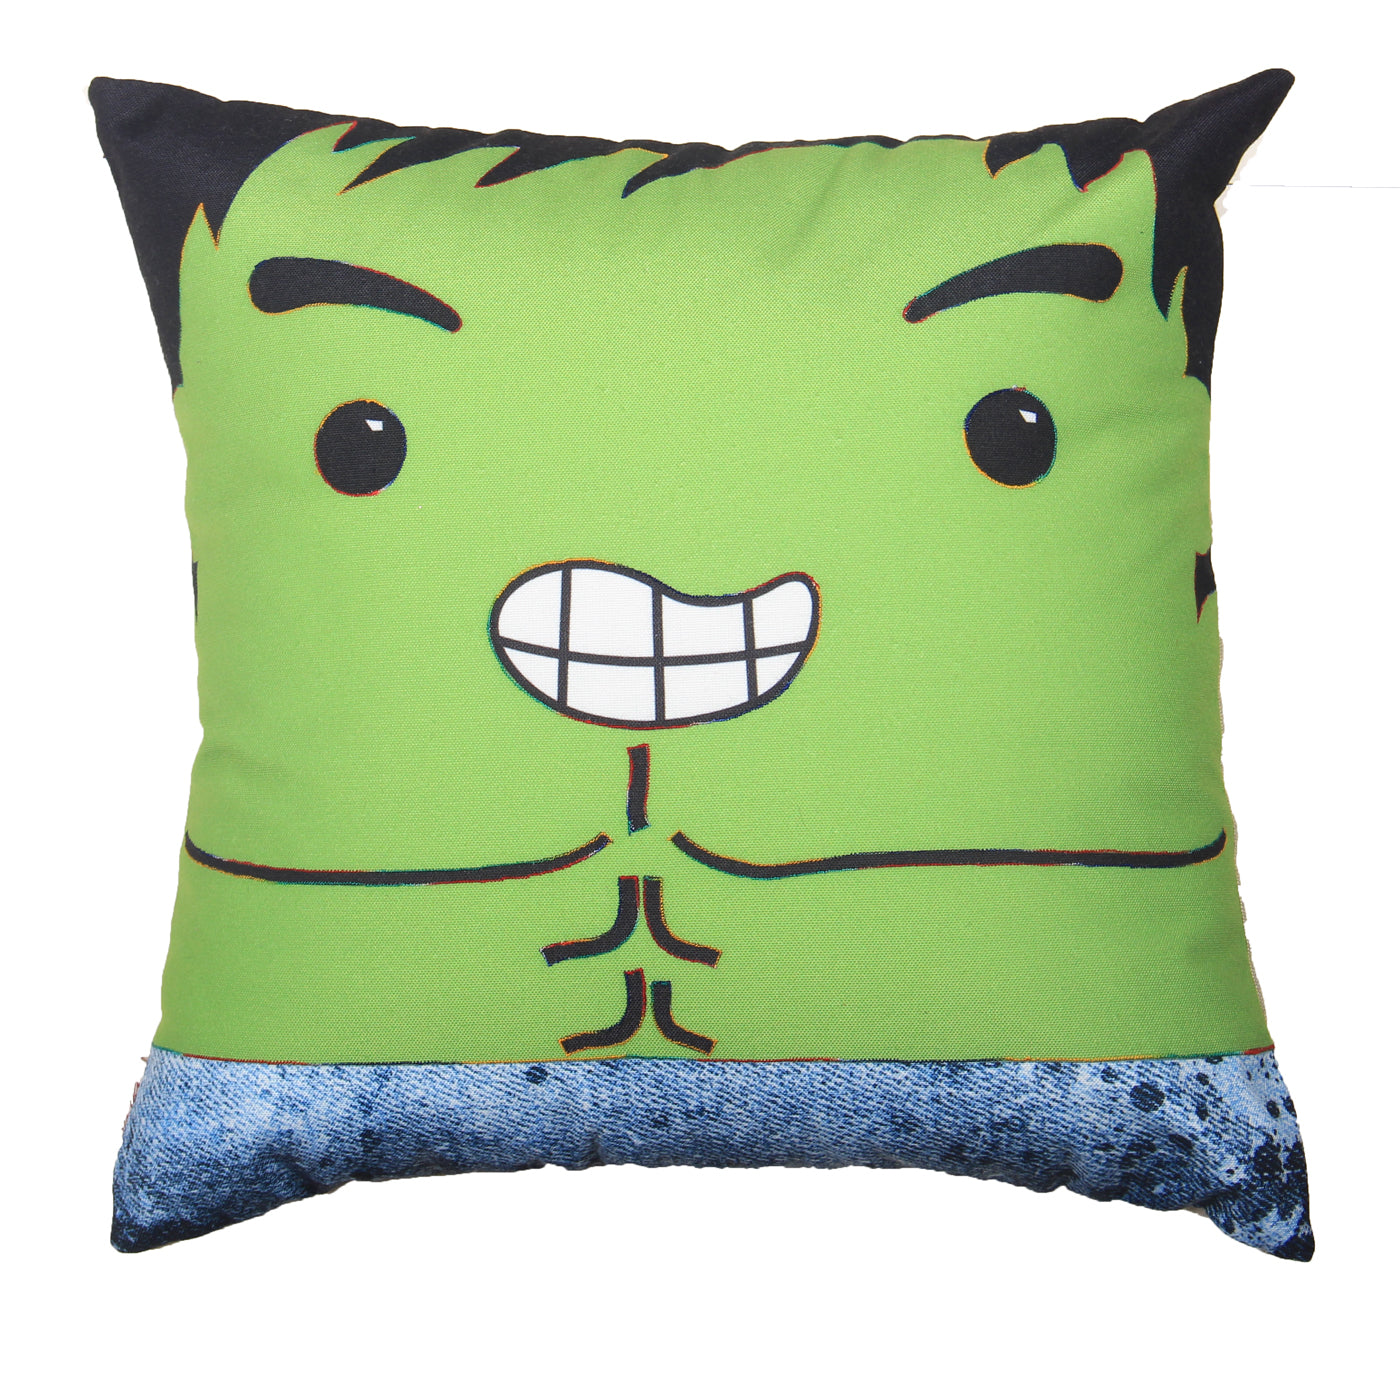 Verde Vibes 16x16 Inch Digital Printed Polyduck Cushion Cover in  Green